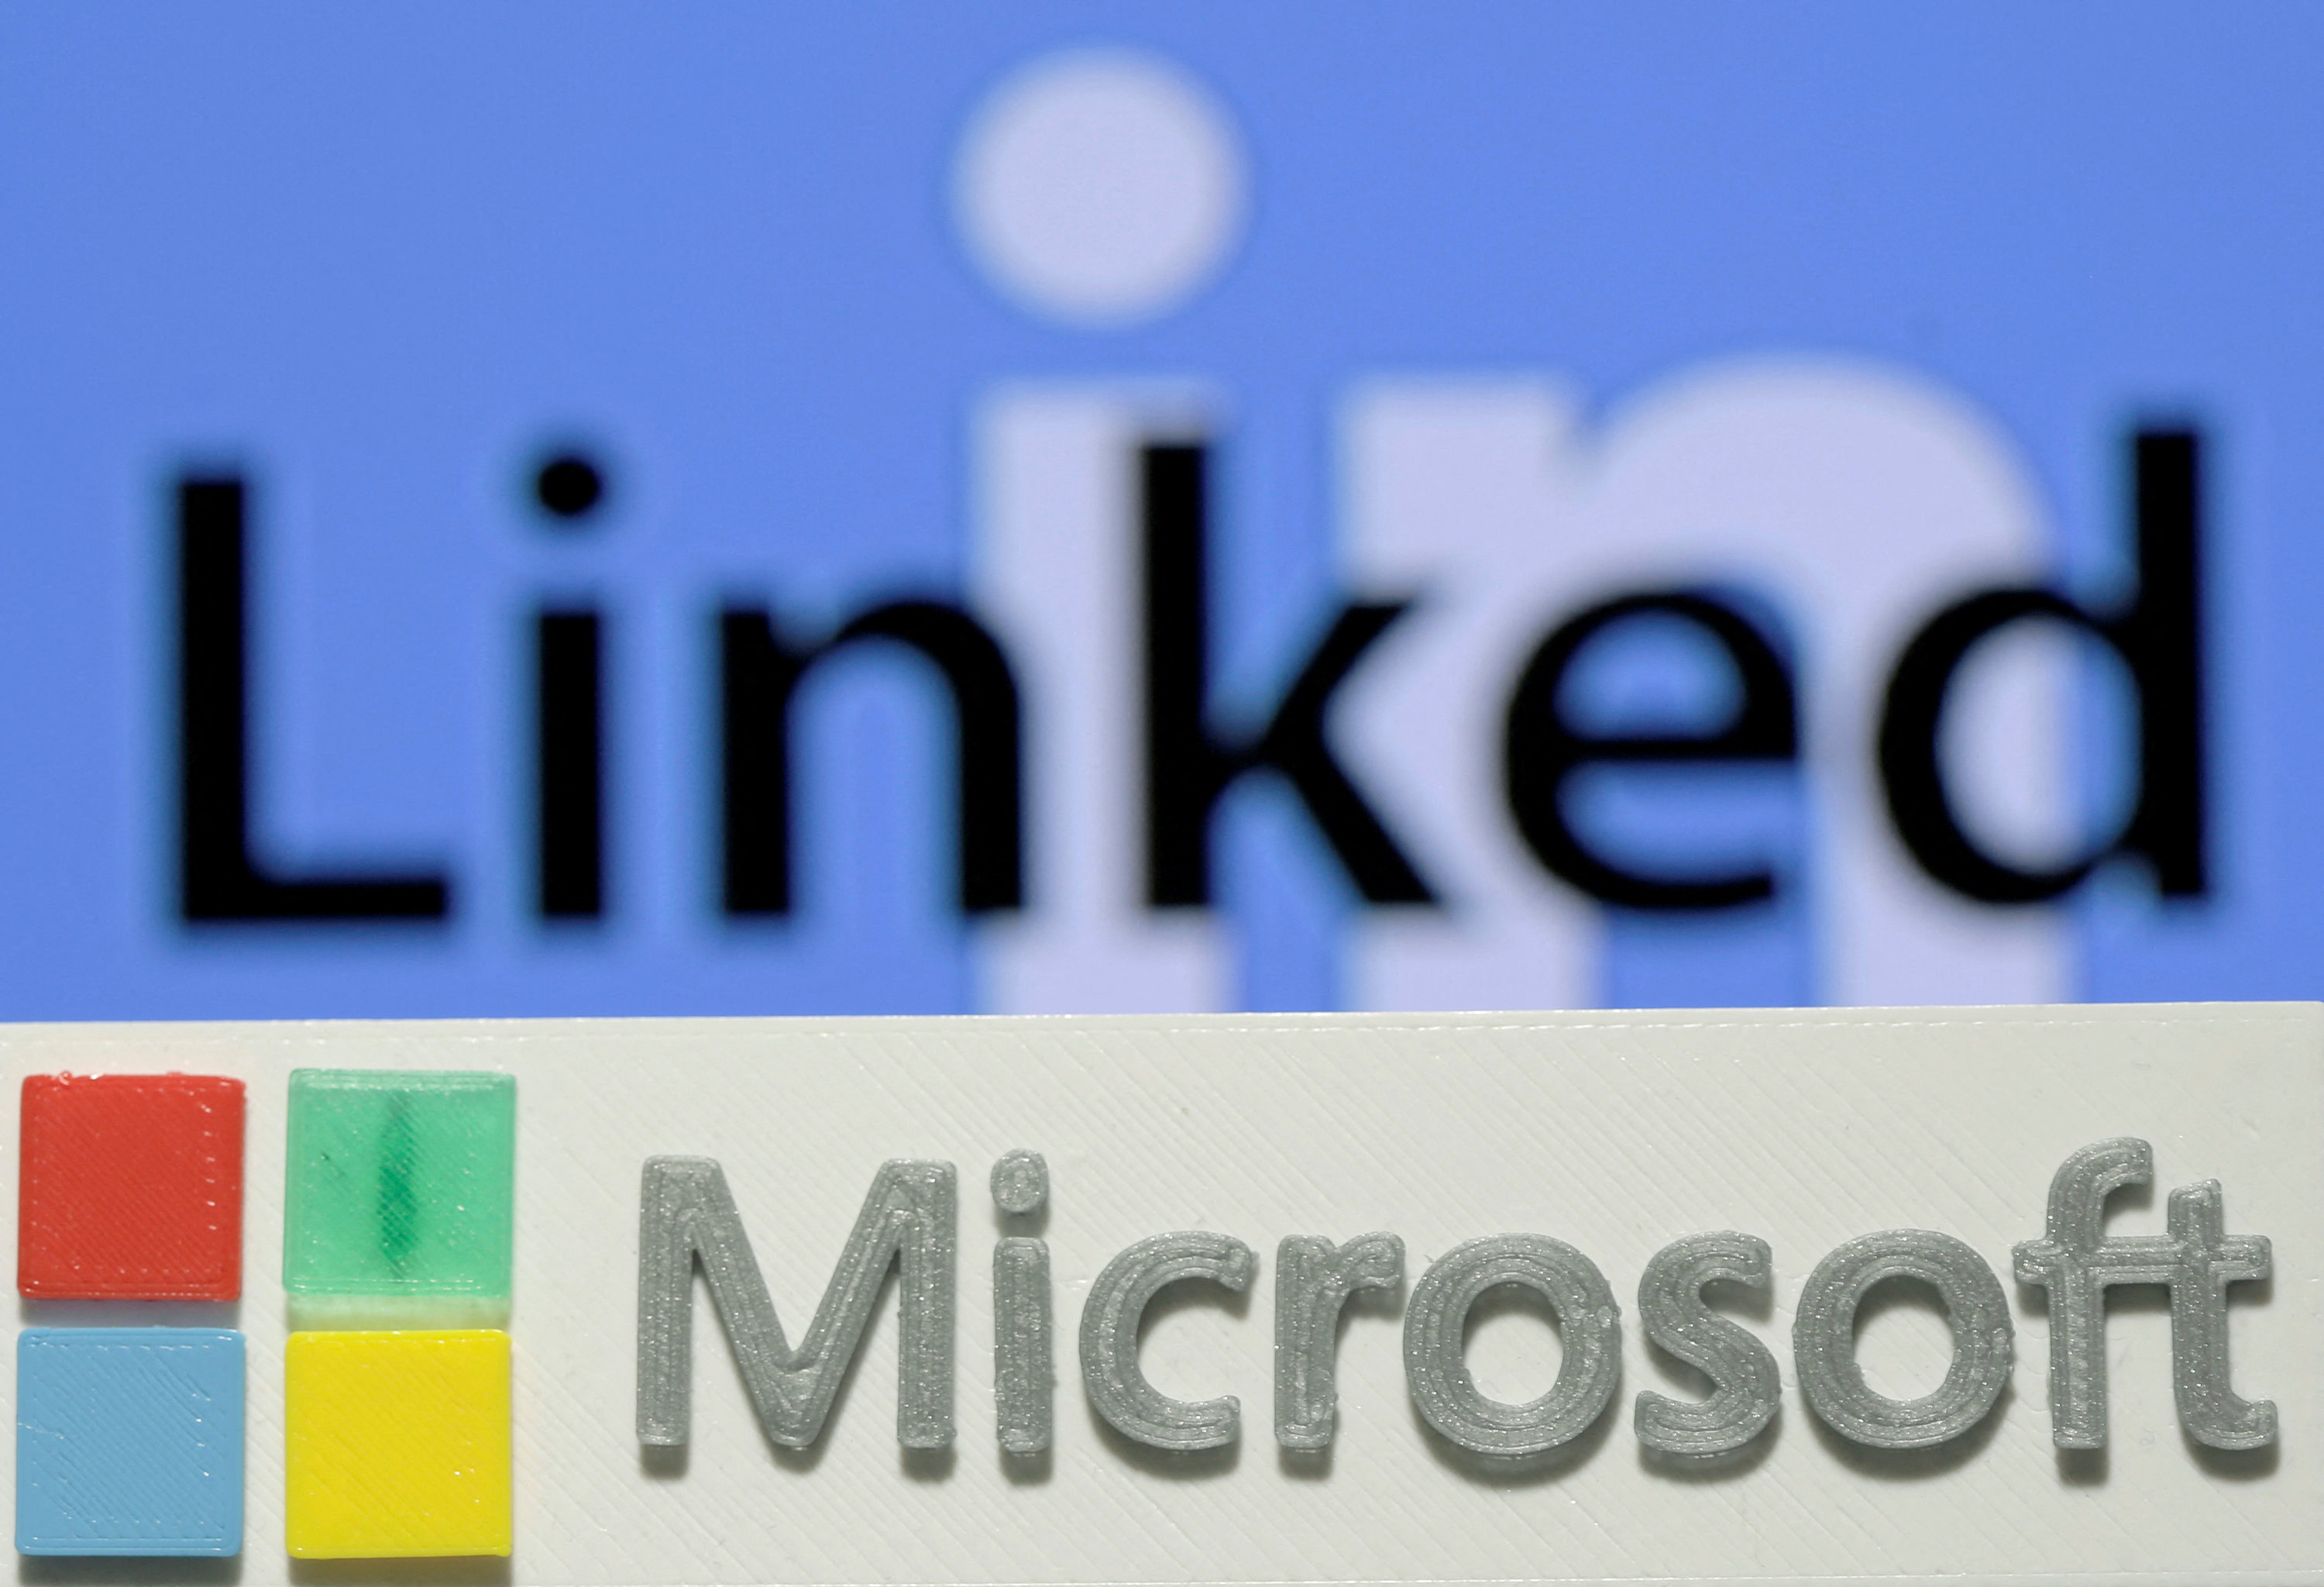 A 3D-printed logo of Microsoft is seen in front of a displayed LinkedIn logo in this illustration